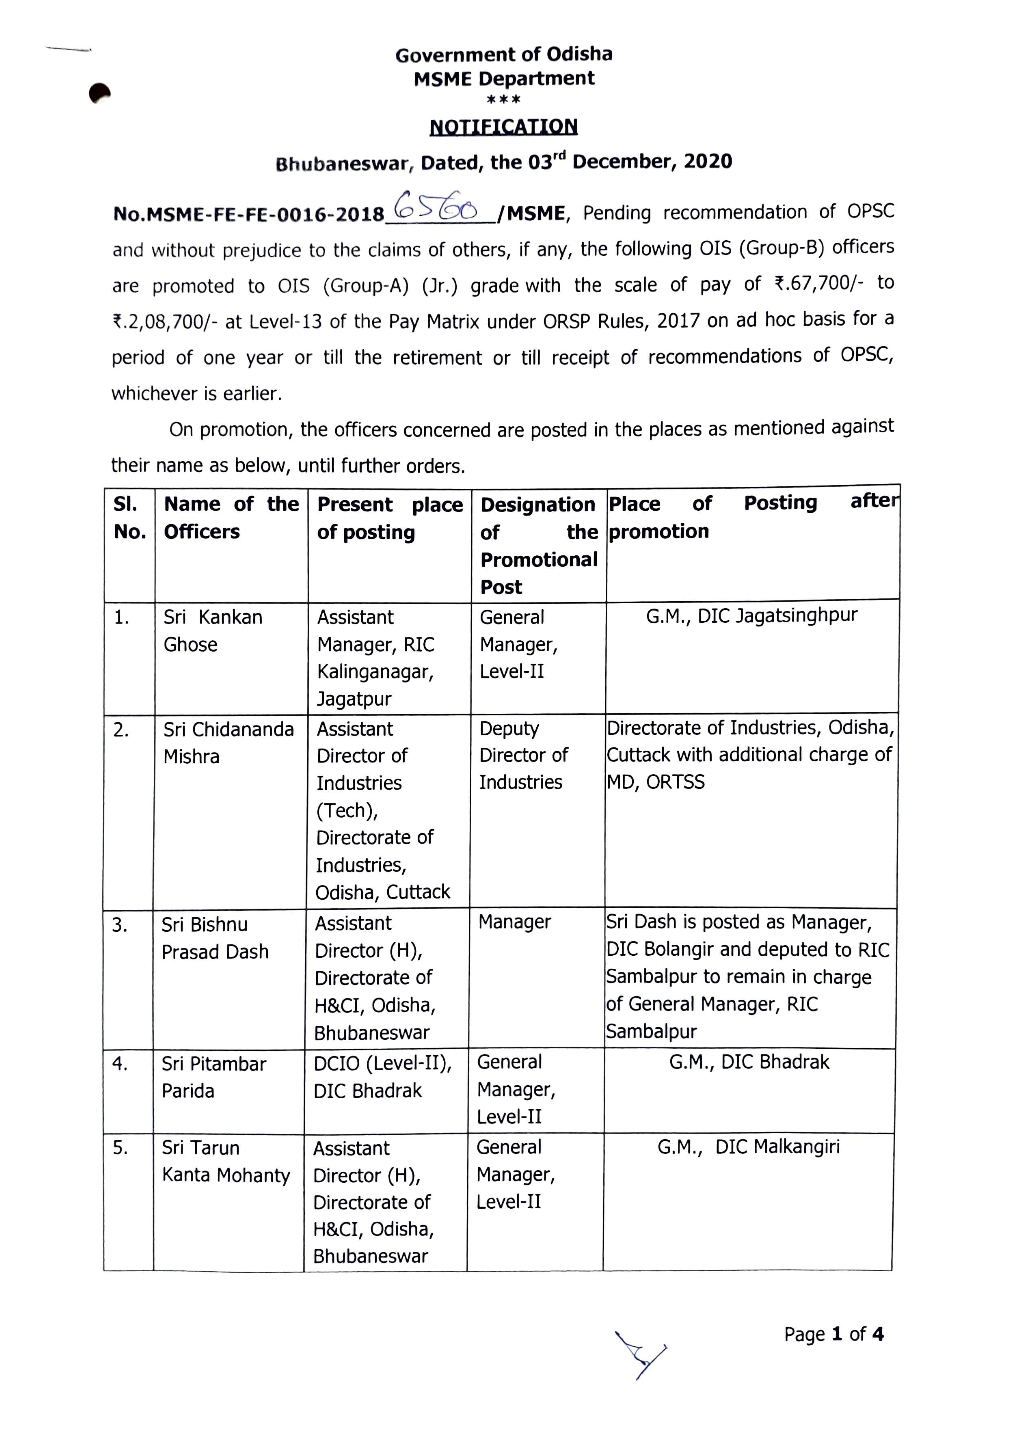 Notification of Promotion of the Officers